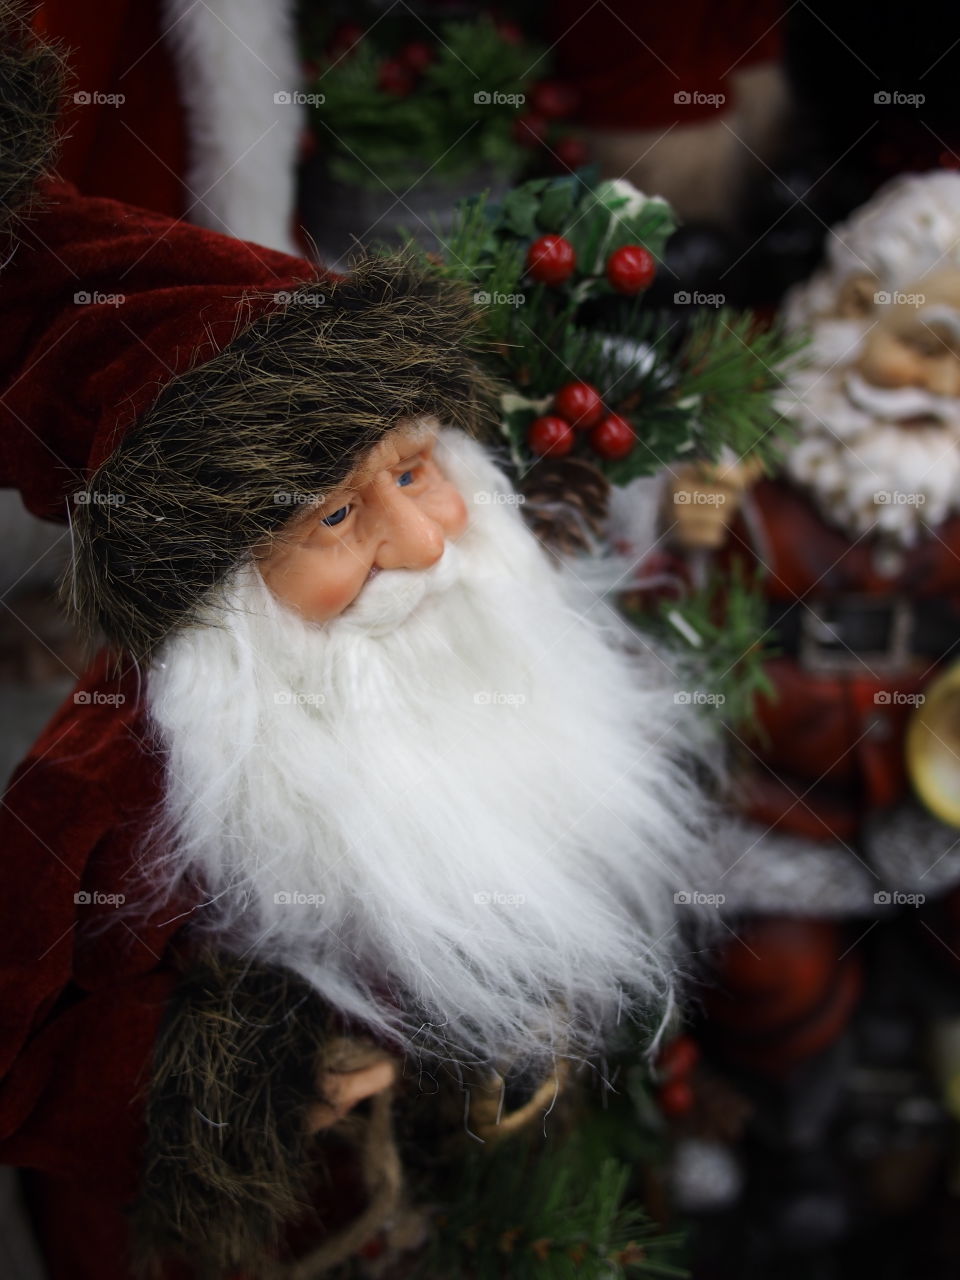 A Santa Clause figures with bushy beard and hat